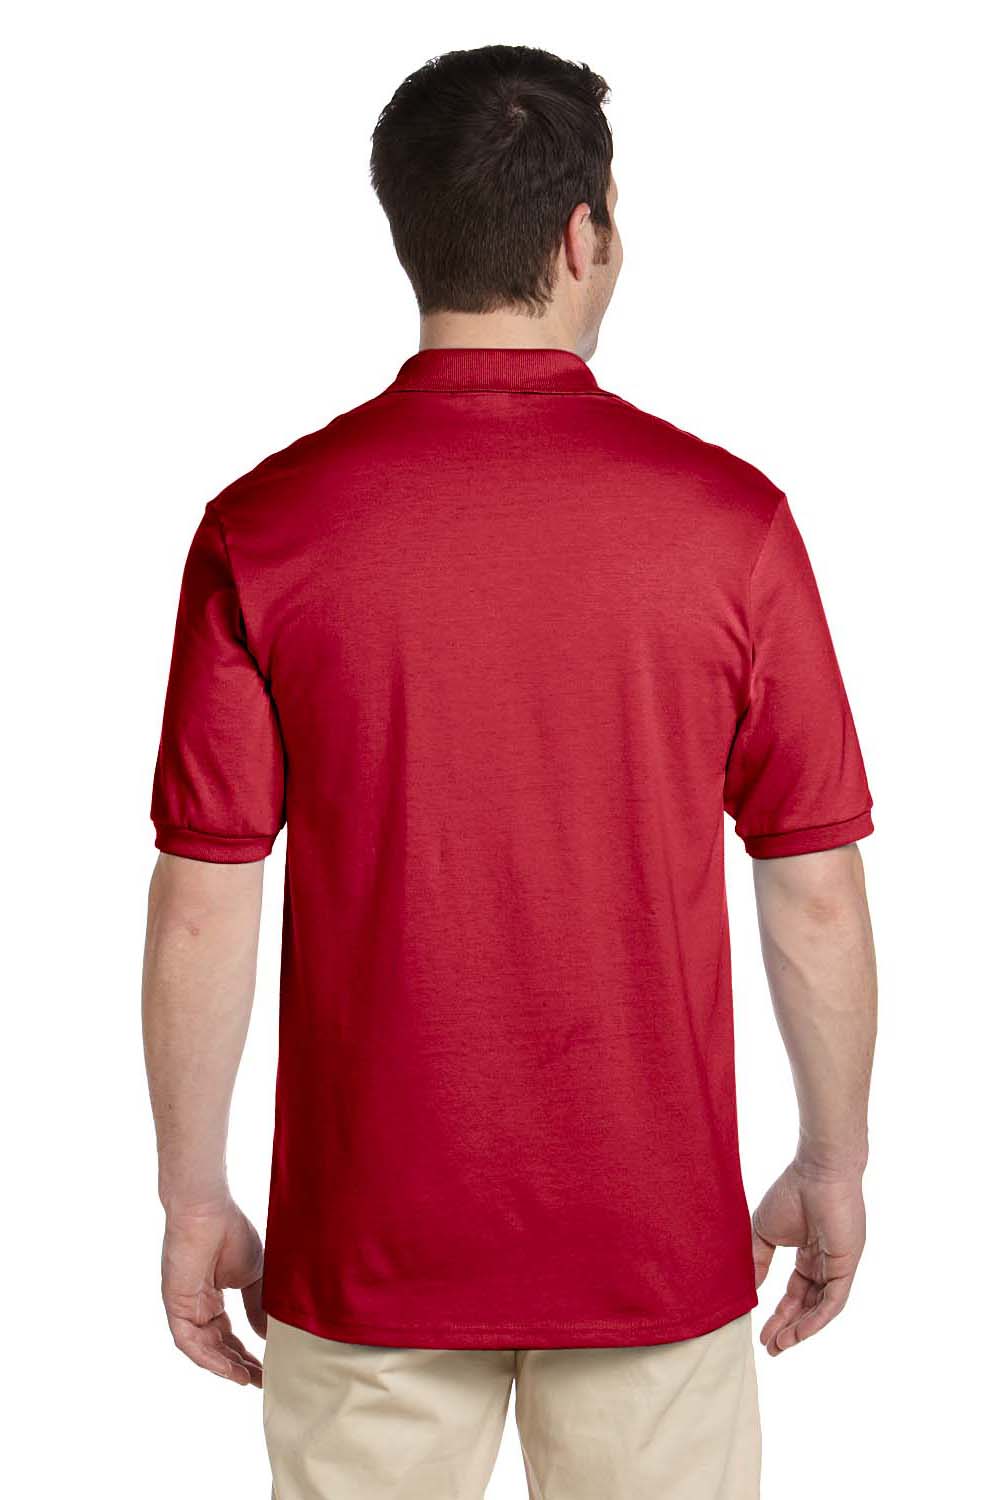 Jerzees 437 Mens SpotShield Stain Resistant Short Sleeve Polo Shirt Red Back